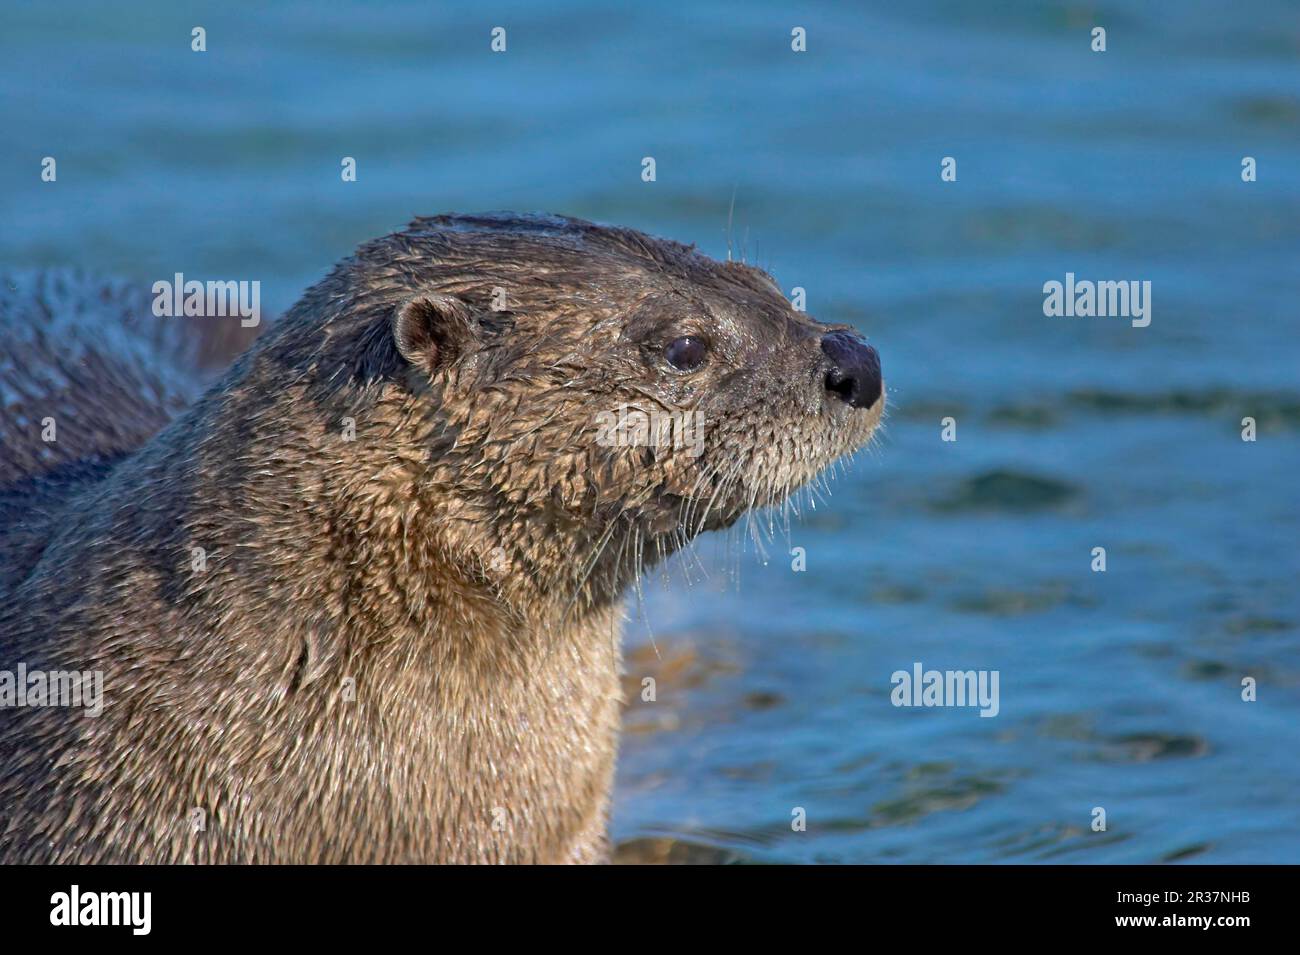 North American north american river otter (Lontra canadensis) adult, close-up of the head, Canada Stock Photo